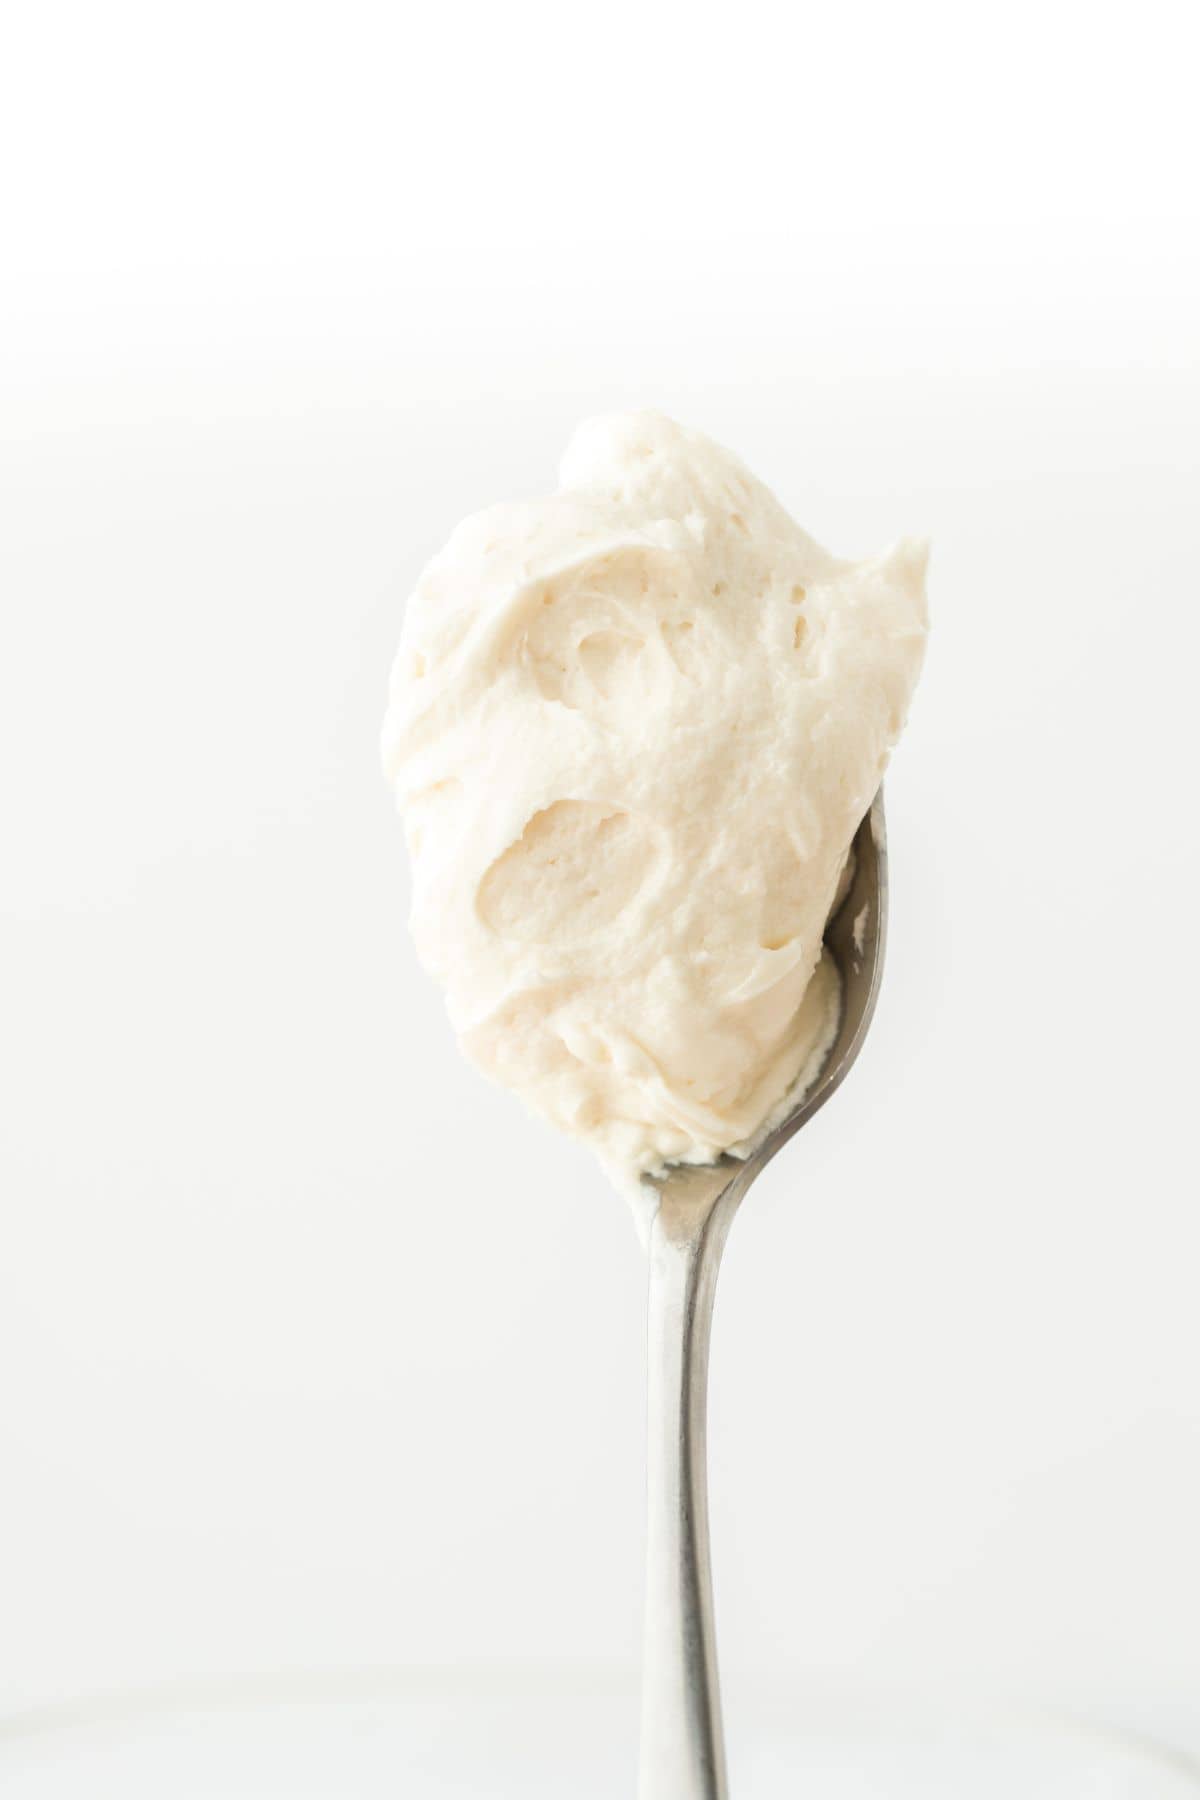 Close up of a spoon with a dollop of thick, creamy hard sauce clinging to it